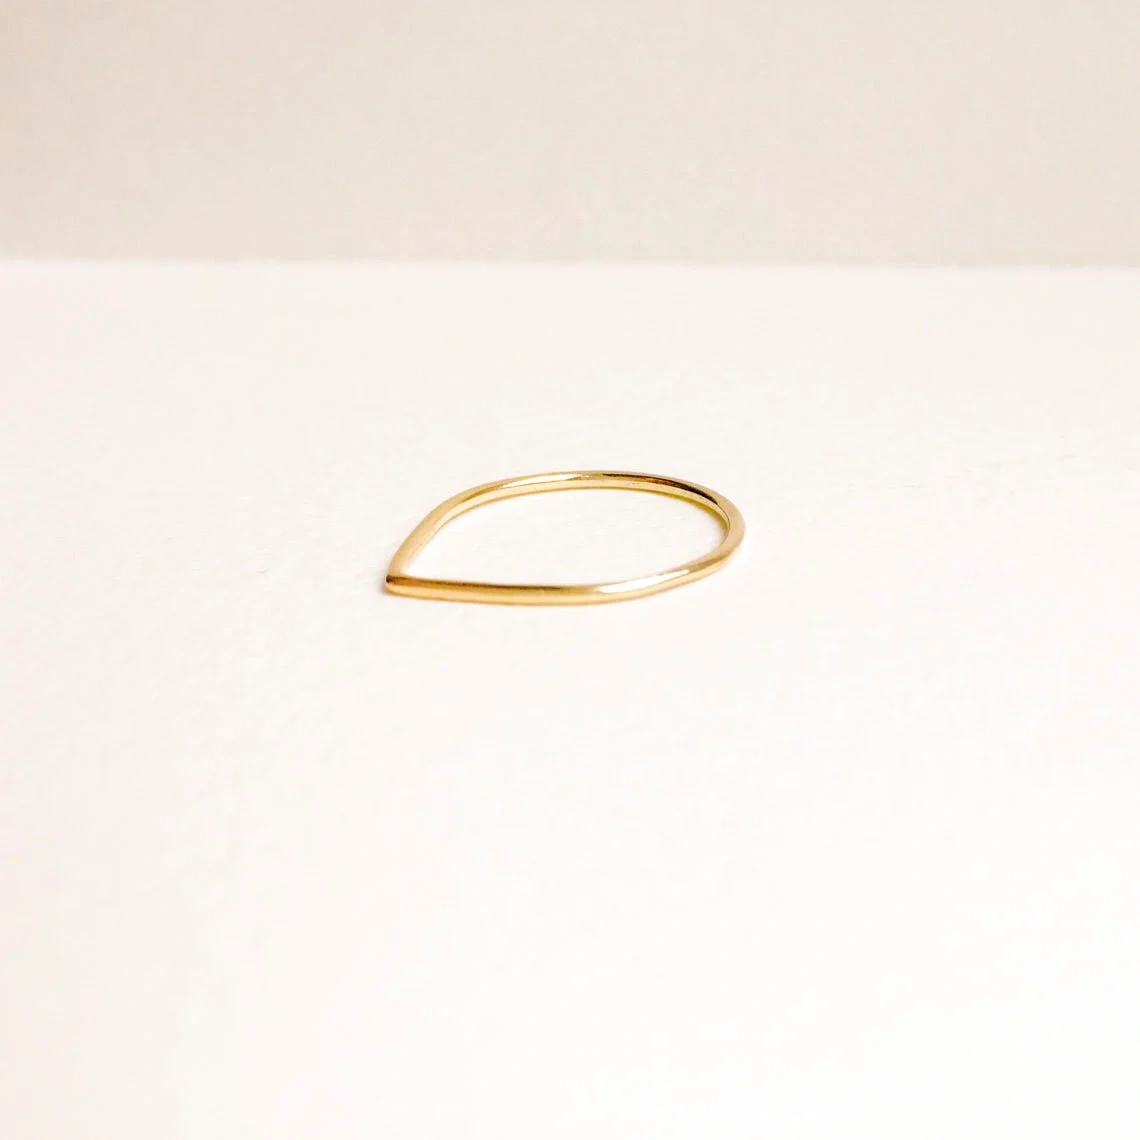 14K Solid Gold Thin Tear Drop Shape Ring Handmade Delicate Geometric Stacking Ring Dainty Minimalist Unique Gold knuckle Bohu Style Ring-10 3/4 US/Uk size – V-2